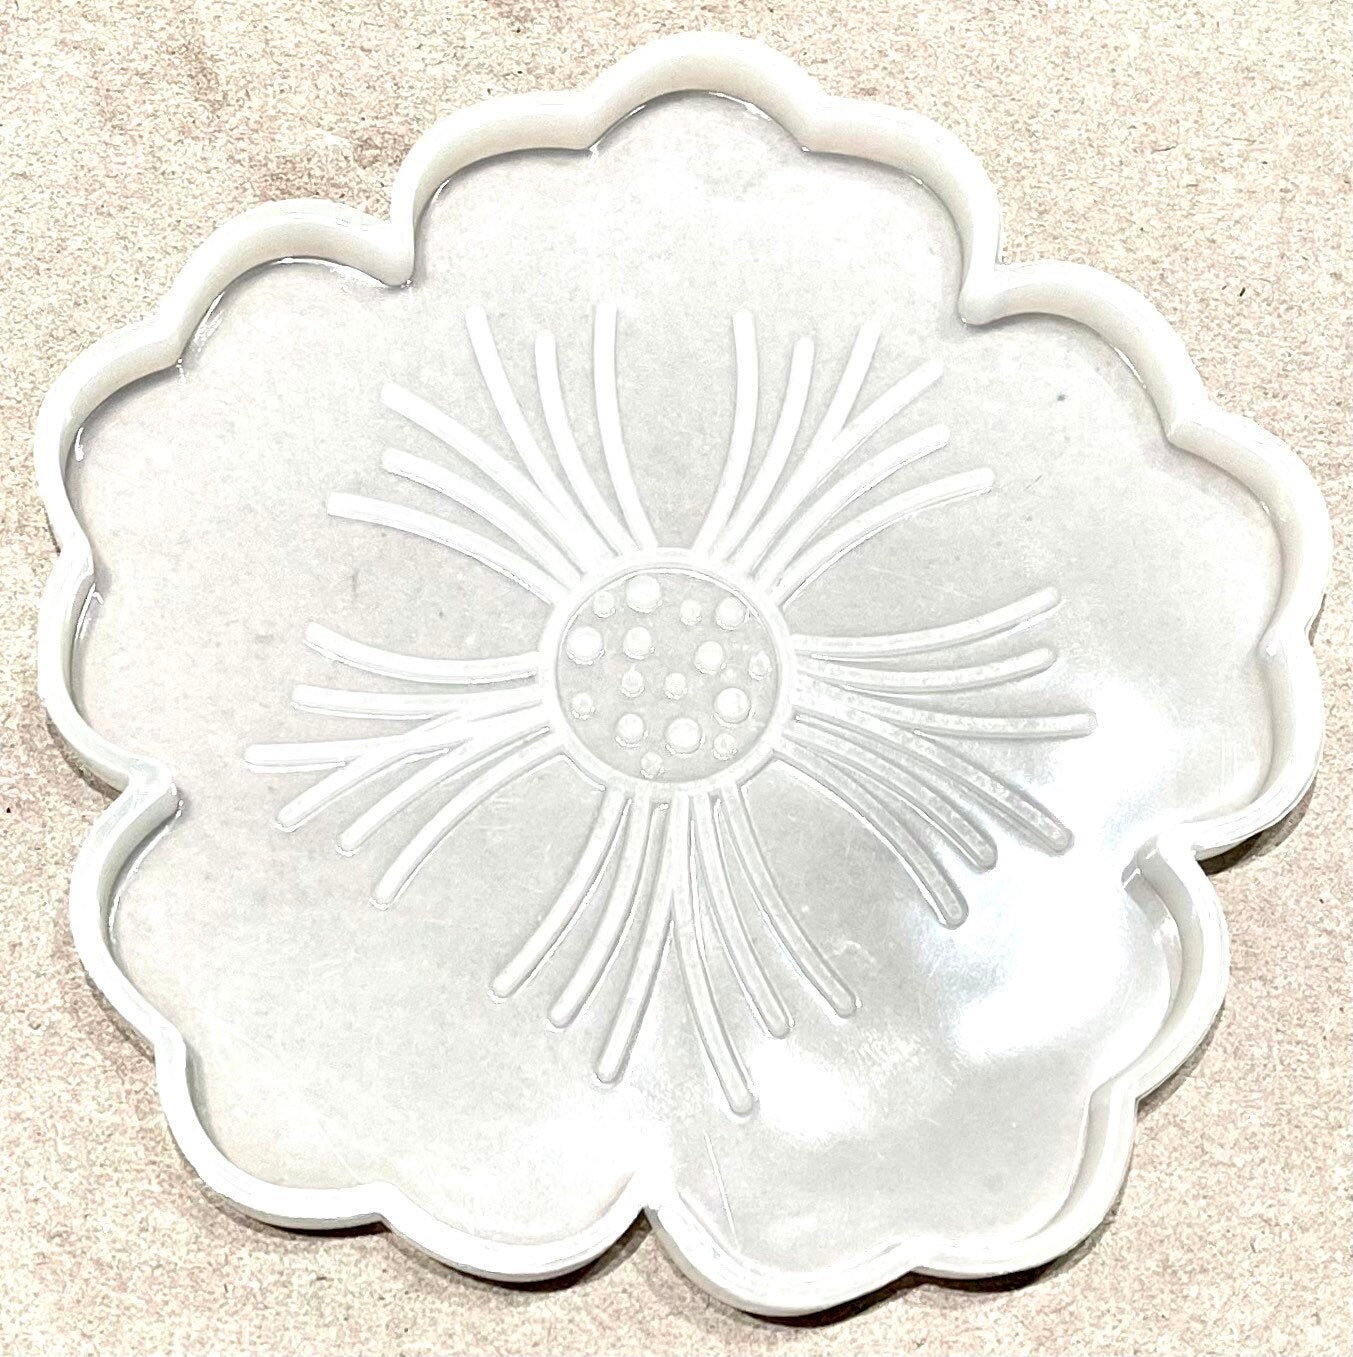 Large Flower Mold Coaster Set for Resin - 6pc Silicone Flow Molds